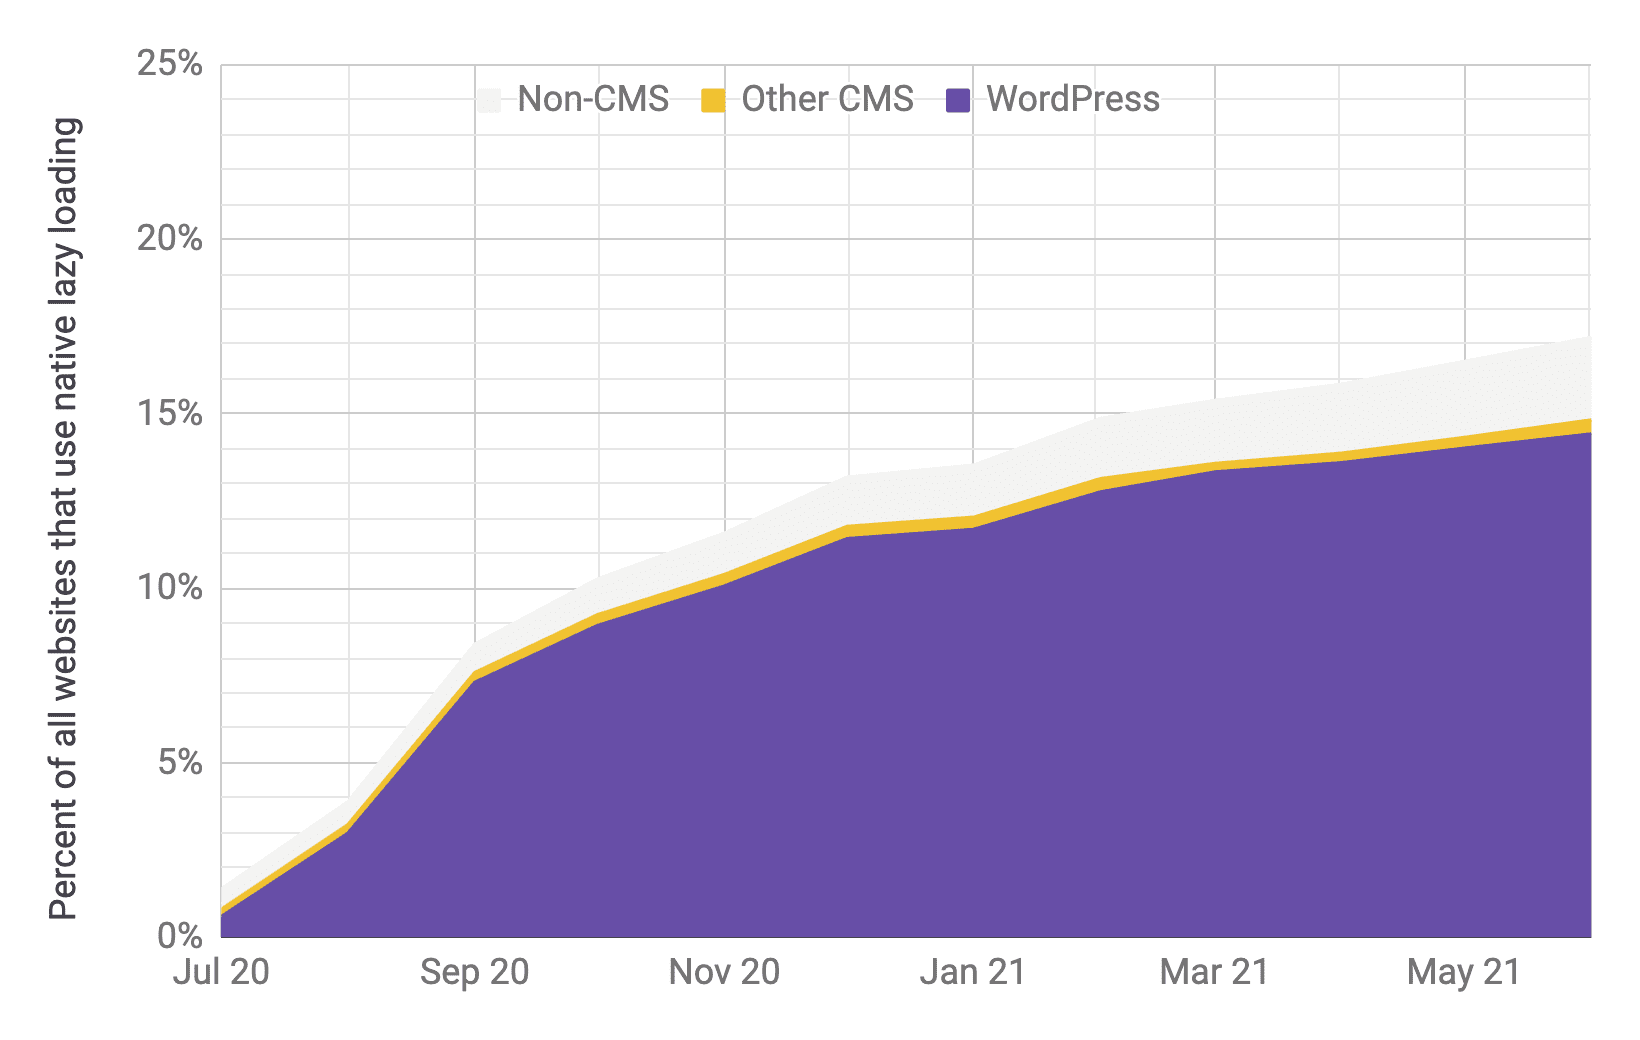 Timeseries chart of lazy loading adoption with WordPress being the predominant player compared to other CMSs and non-CMSs, with similar proportions to the previous chart. Total adoption is shown to have rapidly increased from 1% to 17% from July 2020 to June 2021.